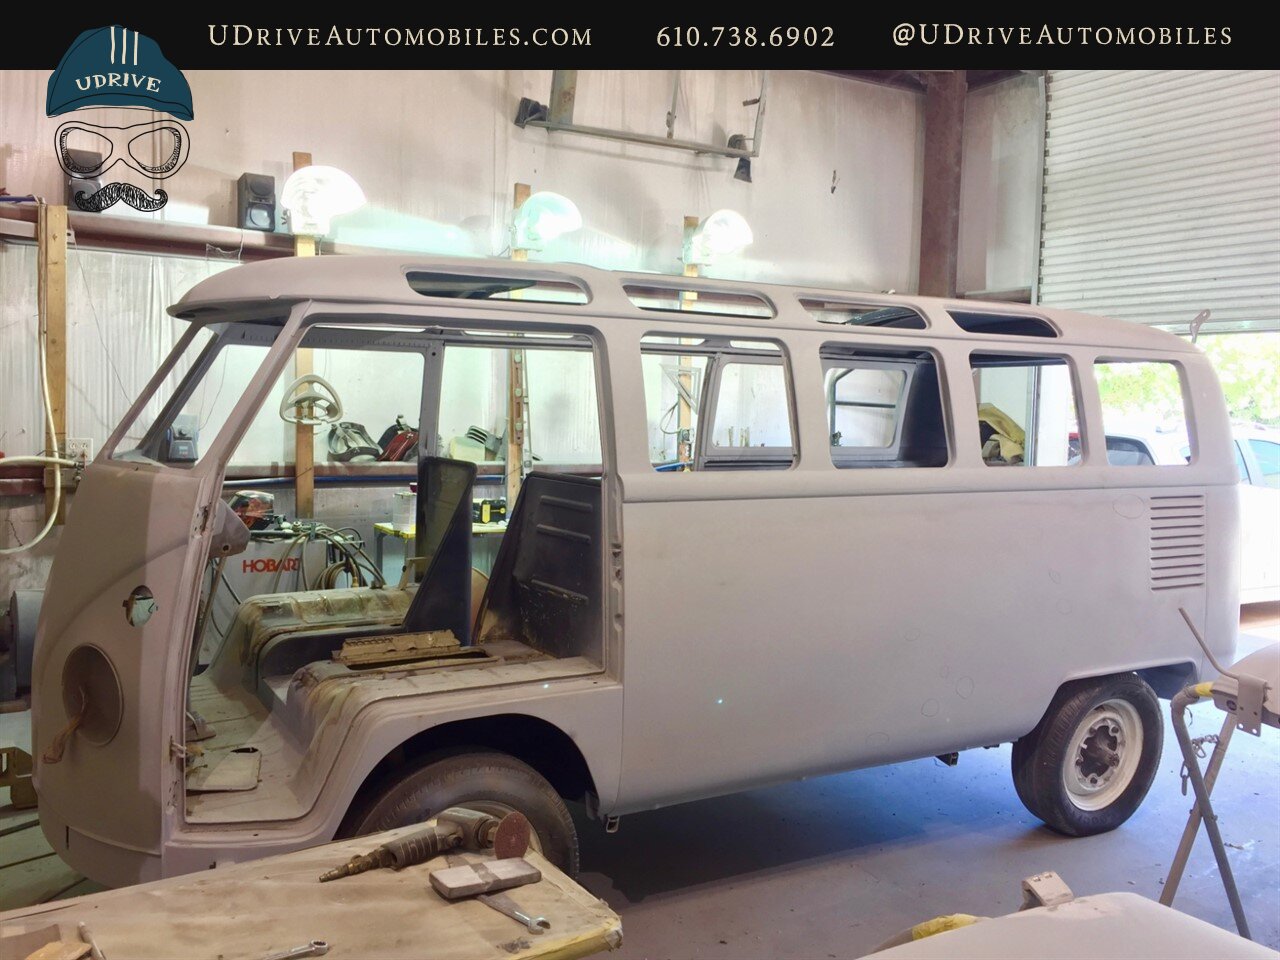 1965 Volkswagen Bus/Vanagon 21 Window Deluxe Transporter  Built By East Coast VW Restorations 1914cc A/C - Photo 77 - West Chester, PA 19382